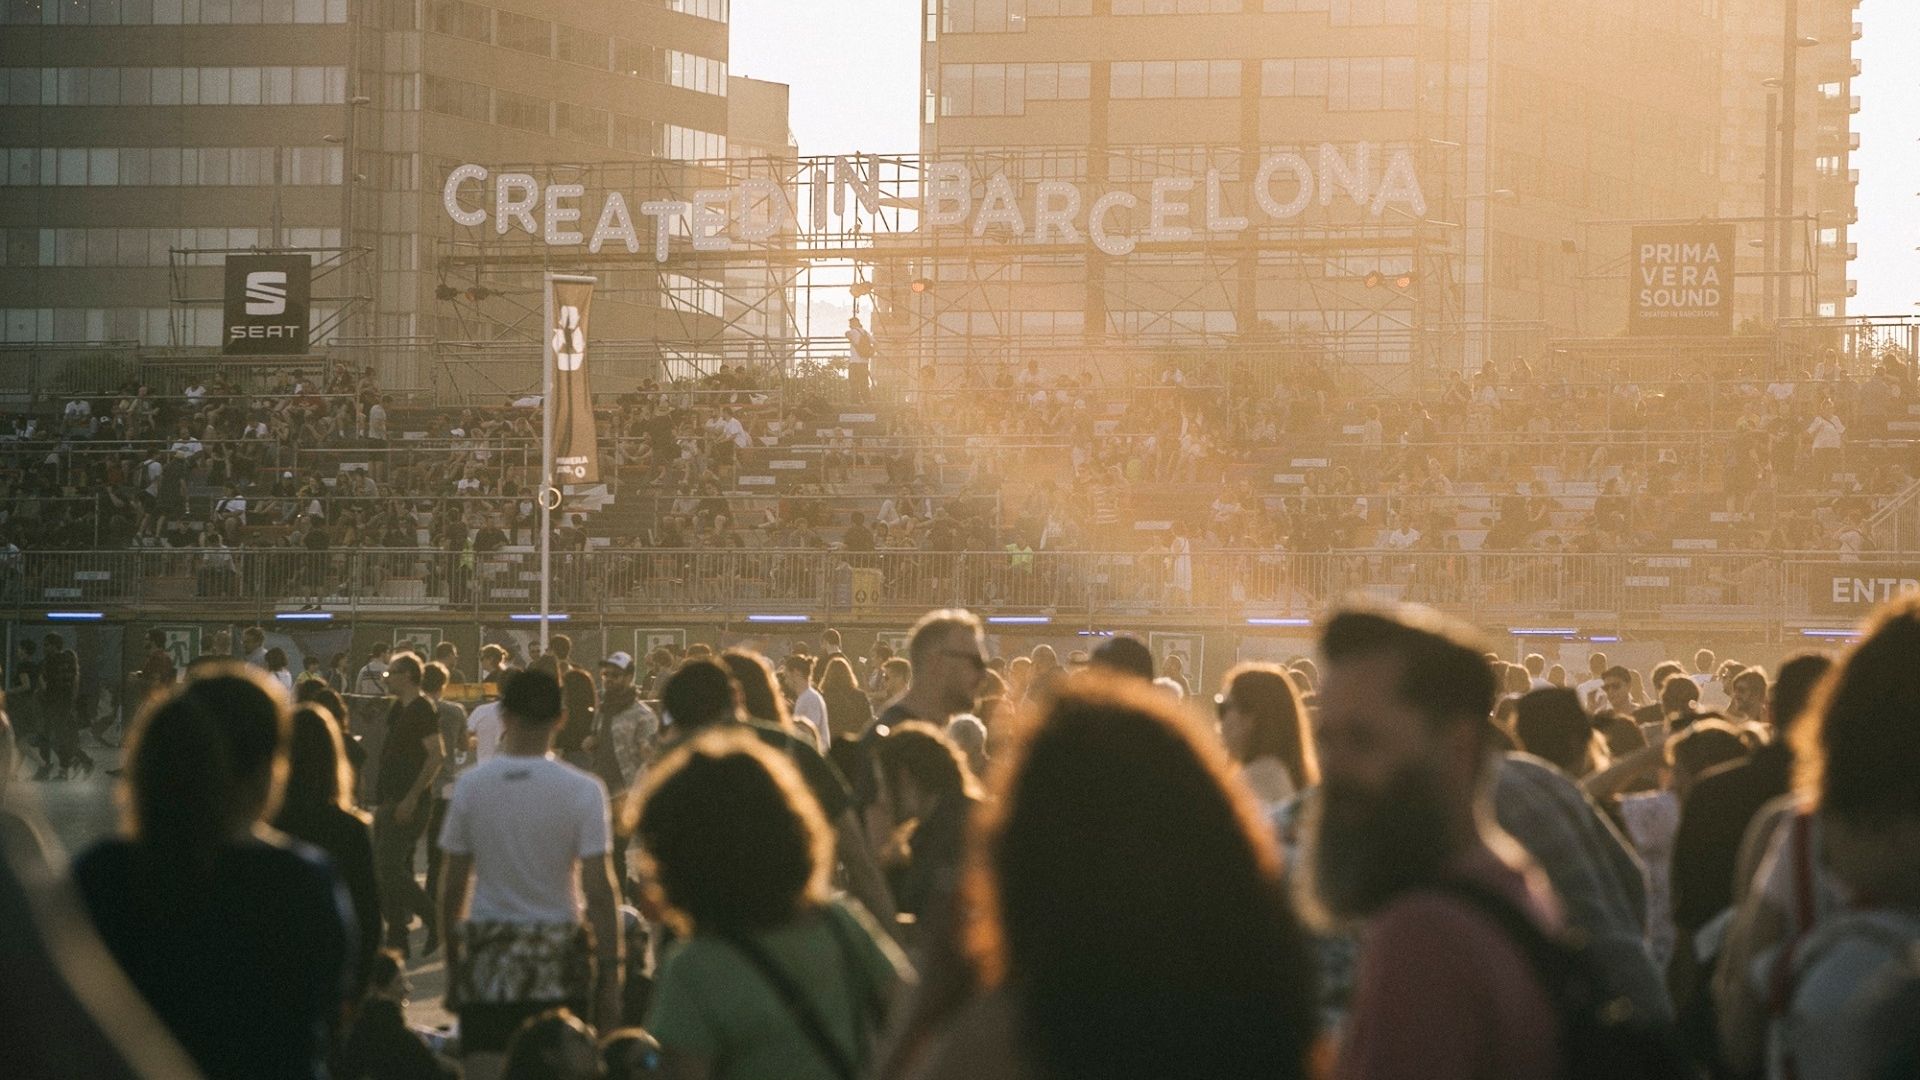 Primavera Sound gives birth to local music and values ​​that transcend musical comedy